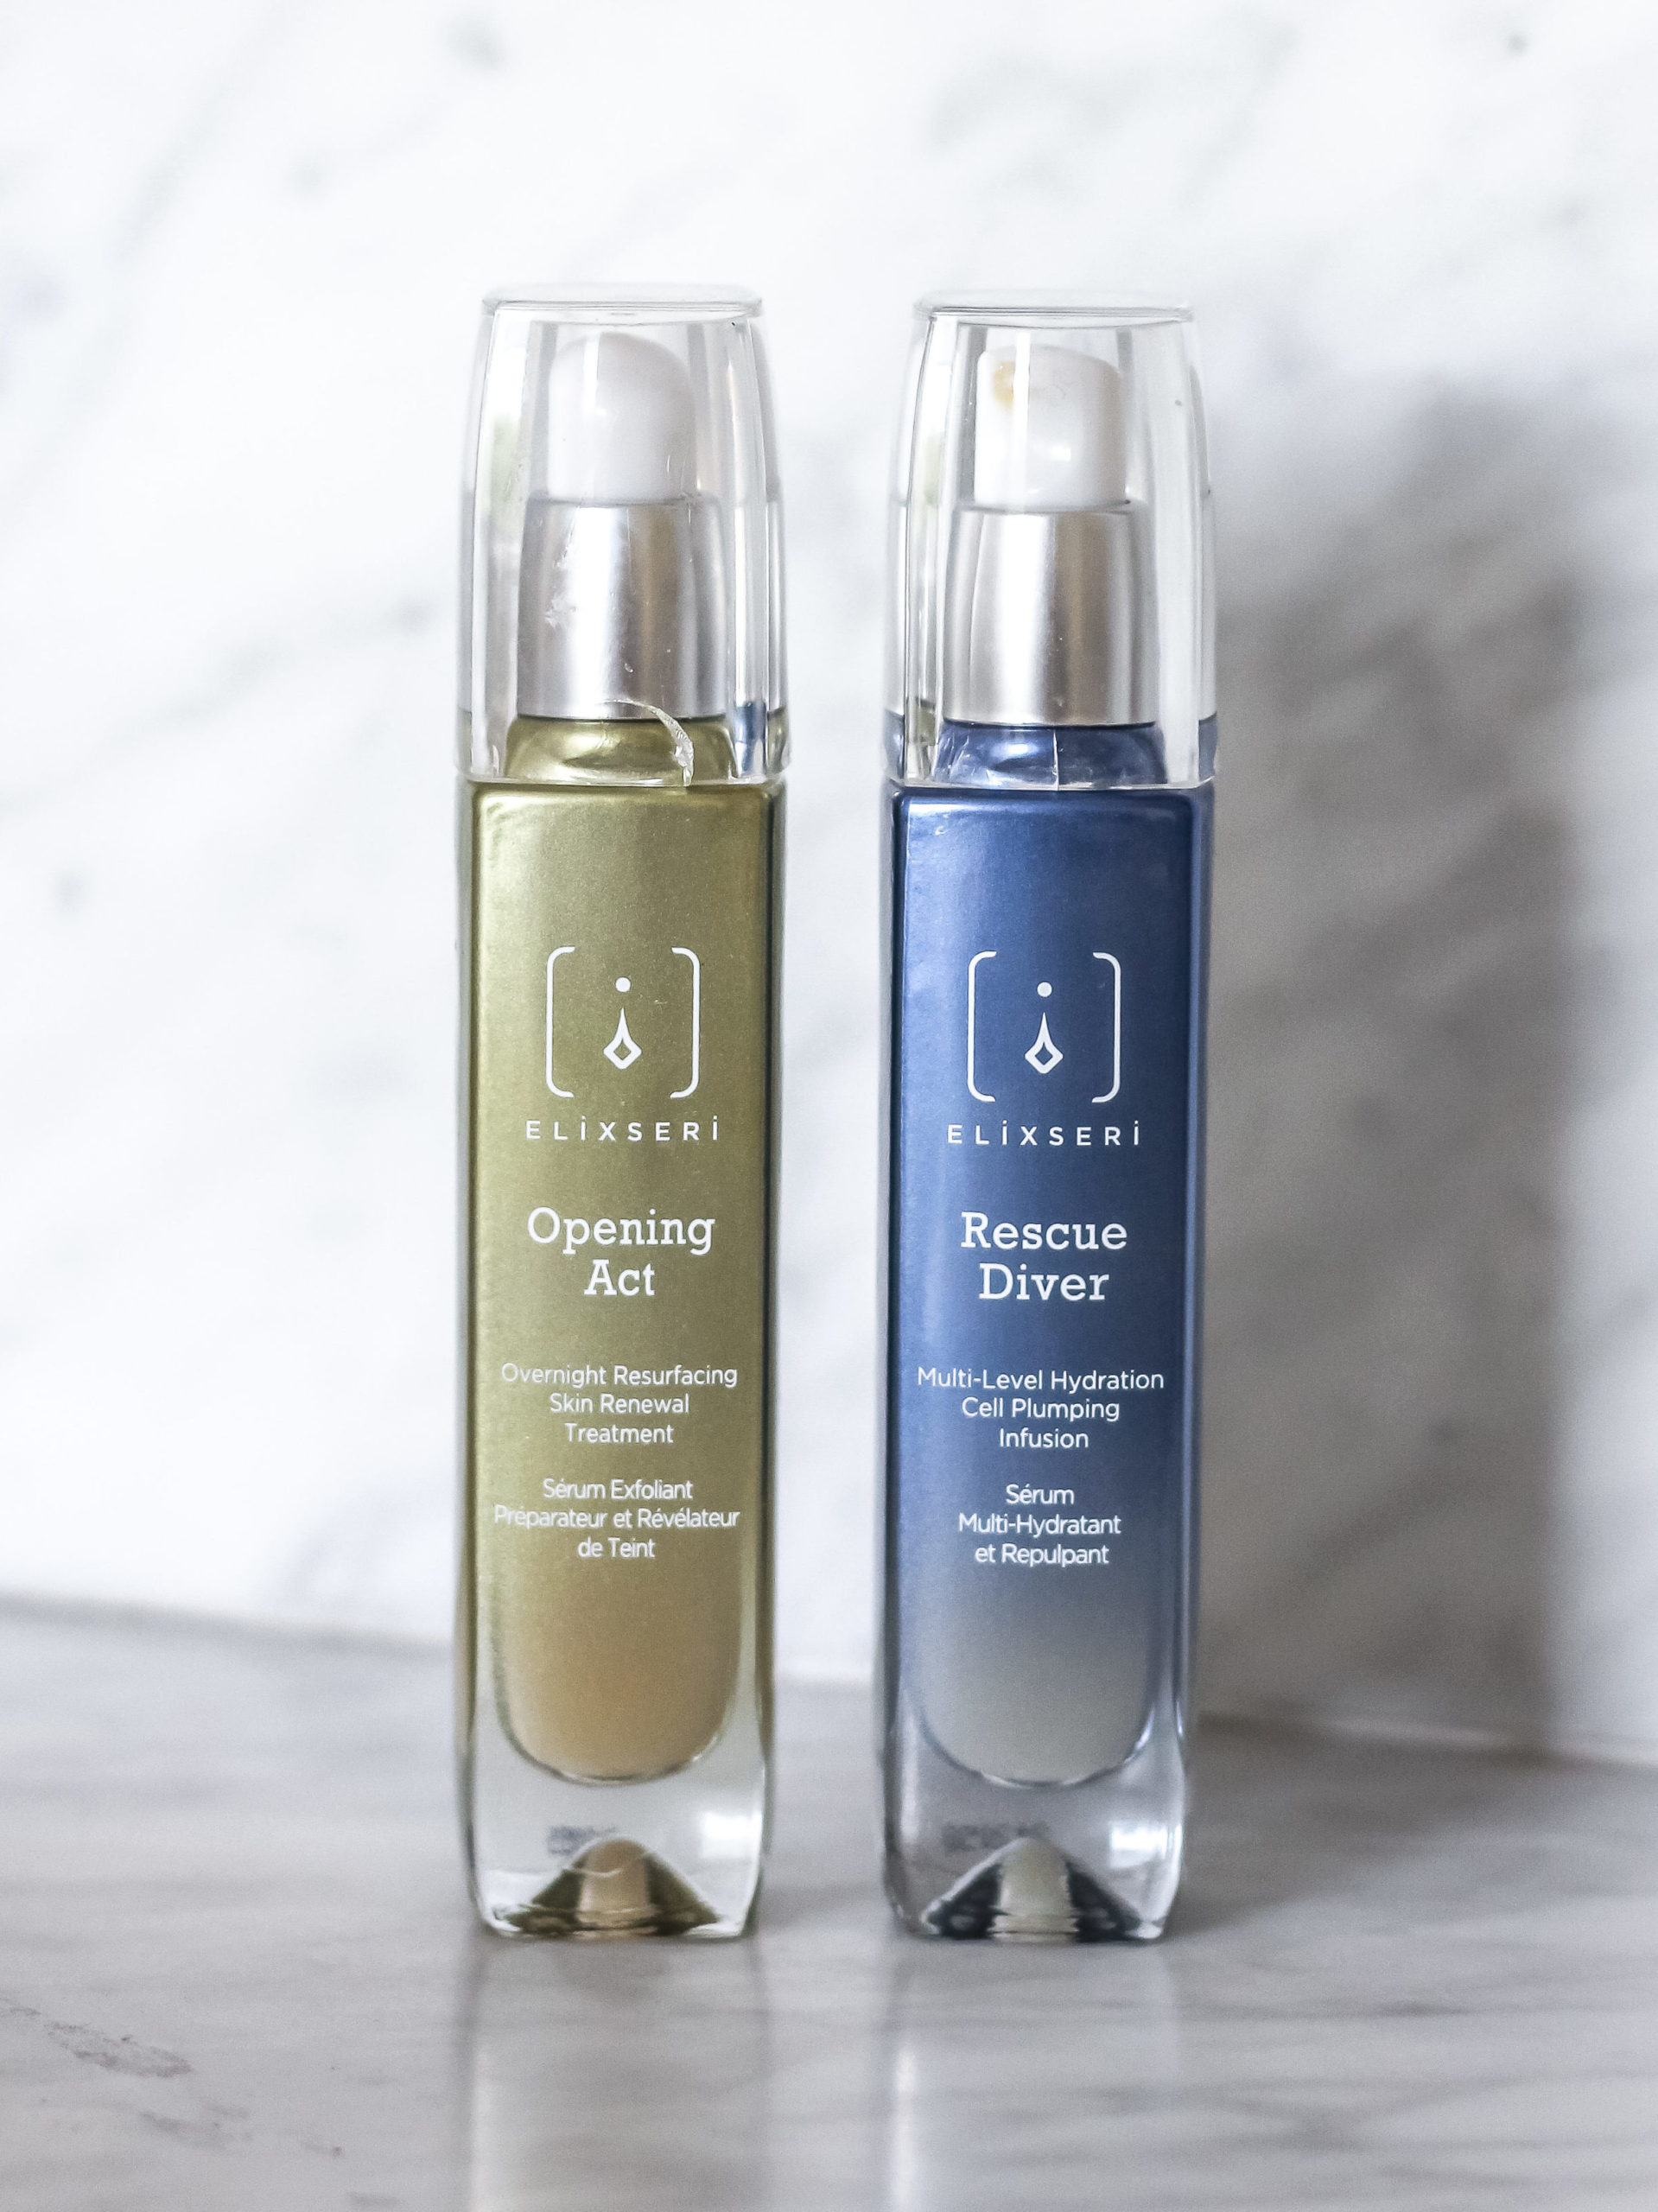 Elixseri serums in a bathroom setting. Opening Act overnight resurfacing serum and Rescue Diver multi-level hydrating serum are Suzanne Duckett's favourite serums.